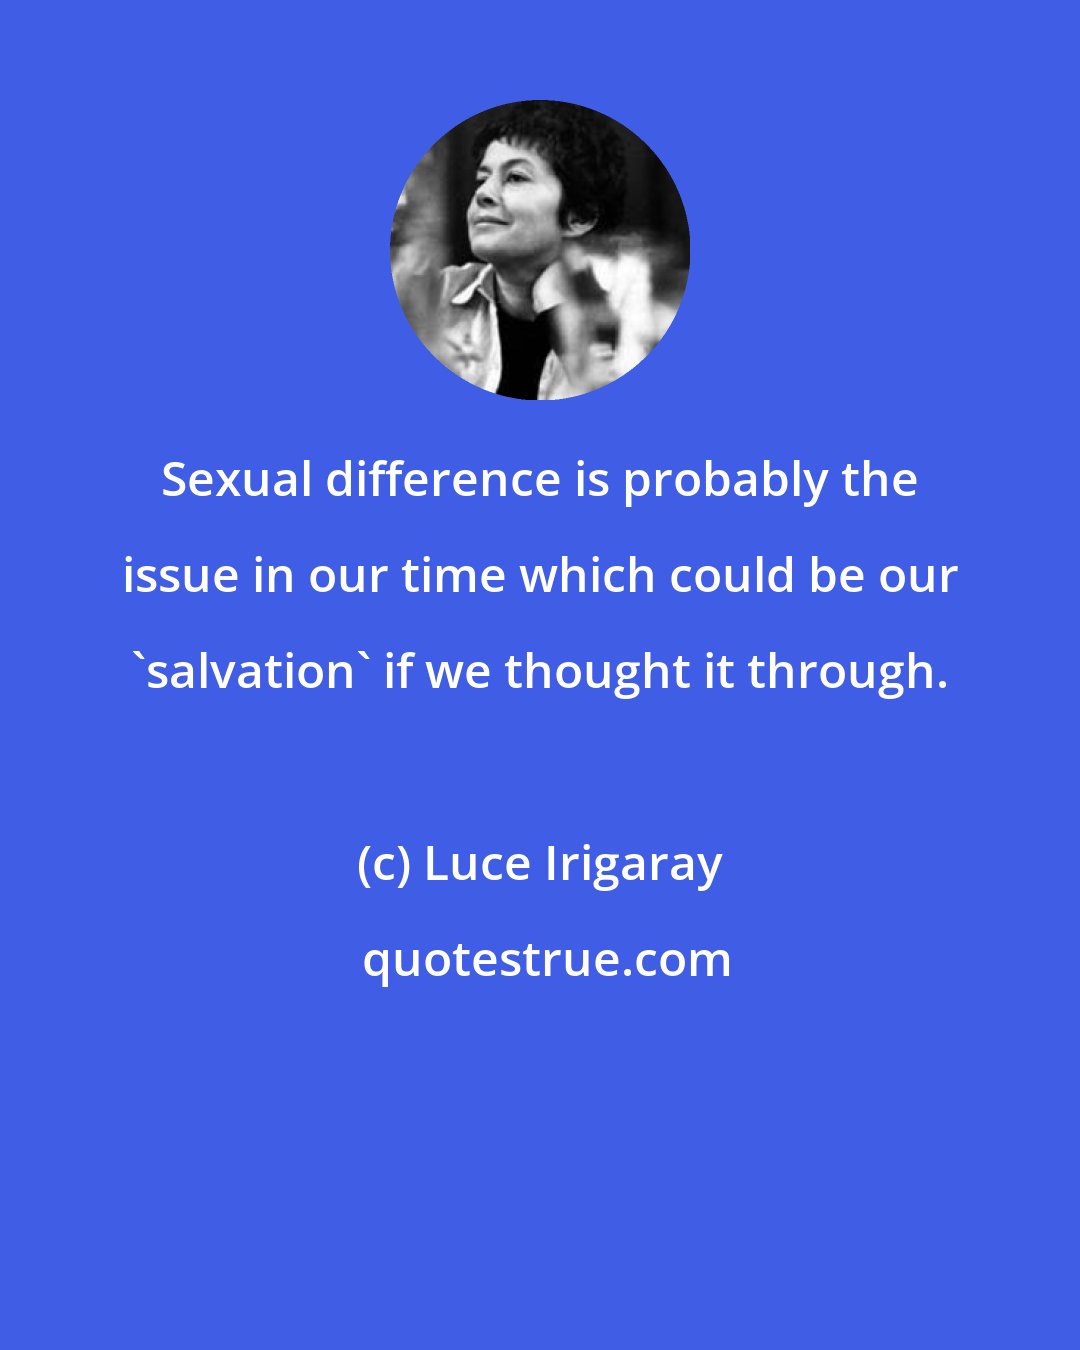 Luce Irigaray: Sexual difference is probably the issue in our time which could be our 'salvation' if we thought it through.